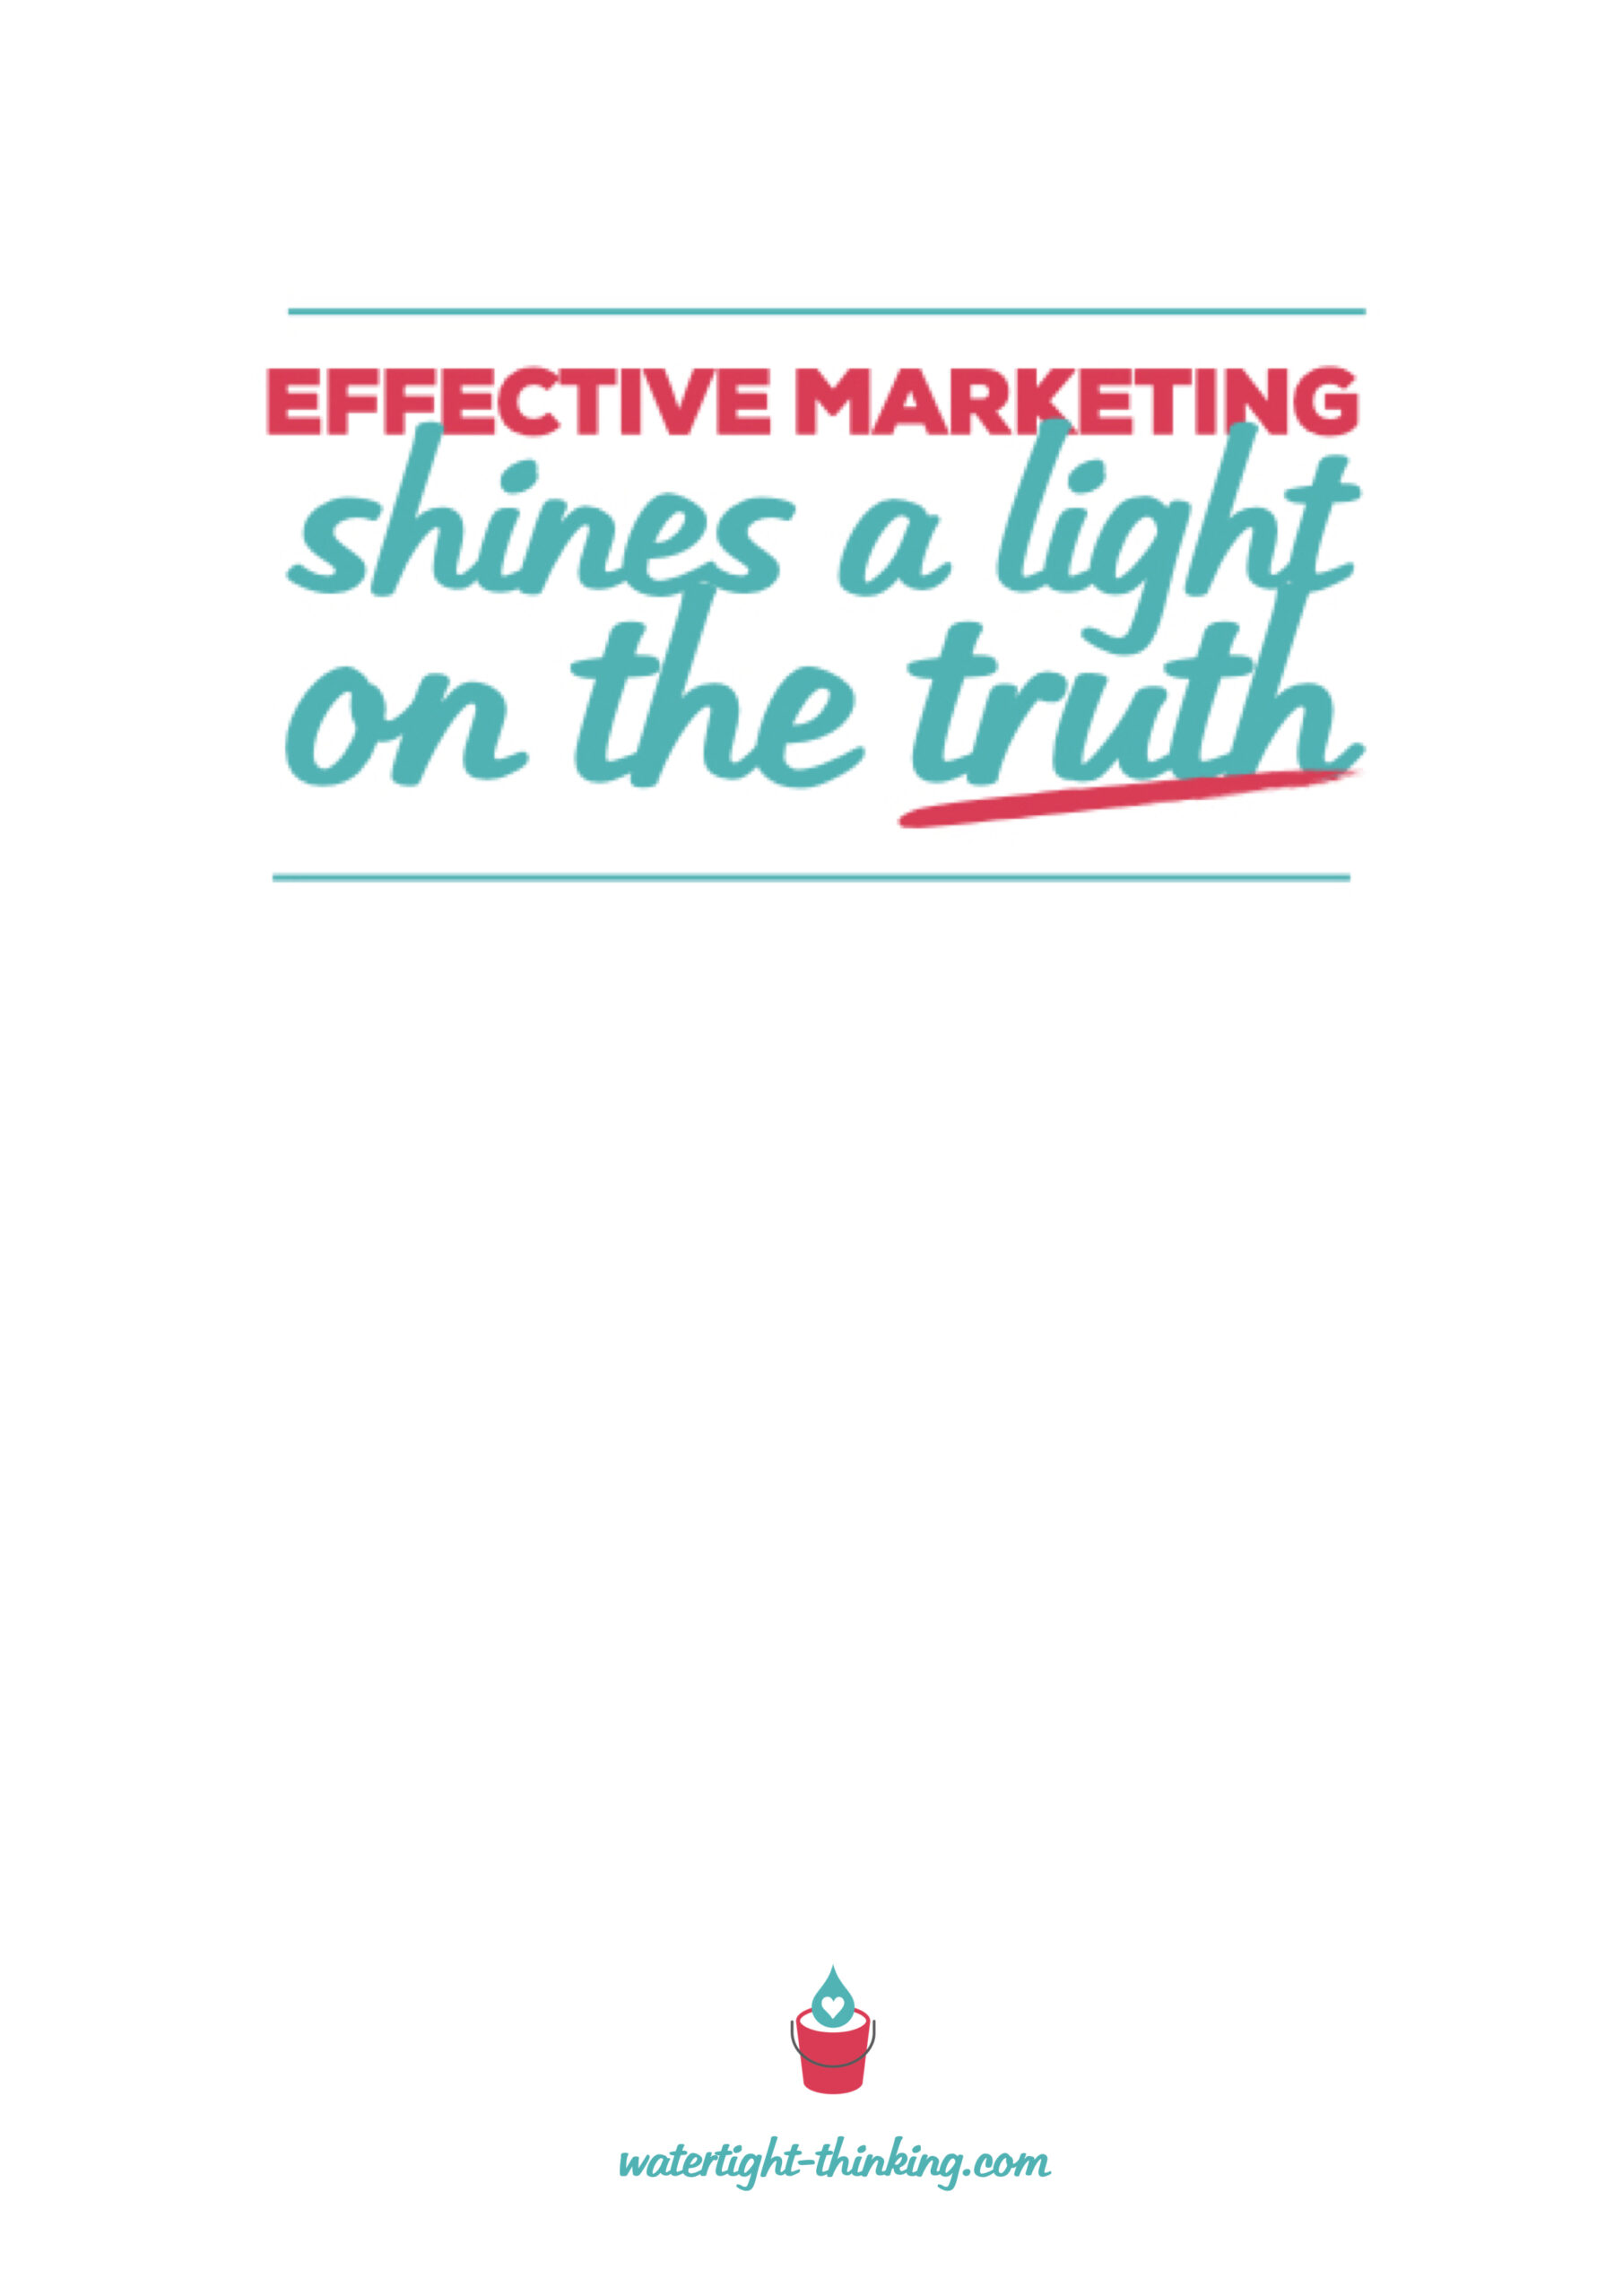 'Effective marketing shines a light on the truth."